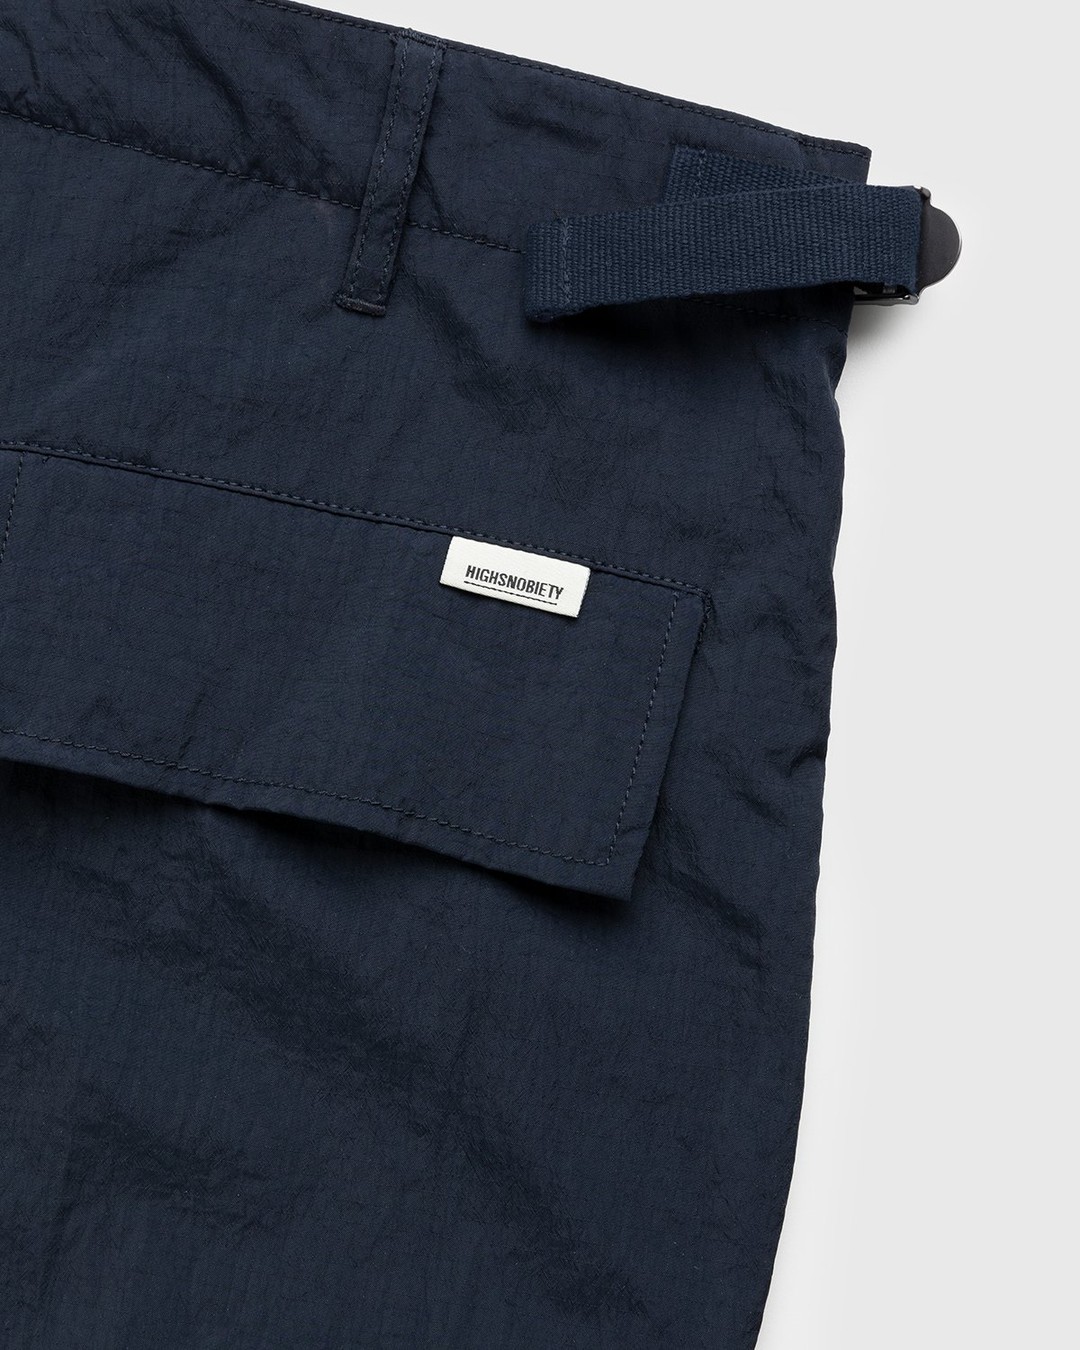 Highsnobiety – Water-Resistant Ripstop Cargo Pants Blue - Pants - Blue - Image 5